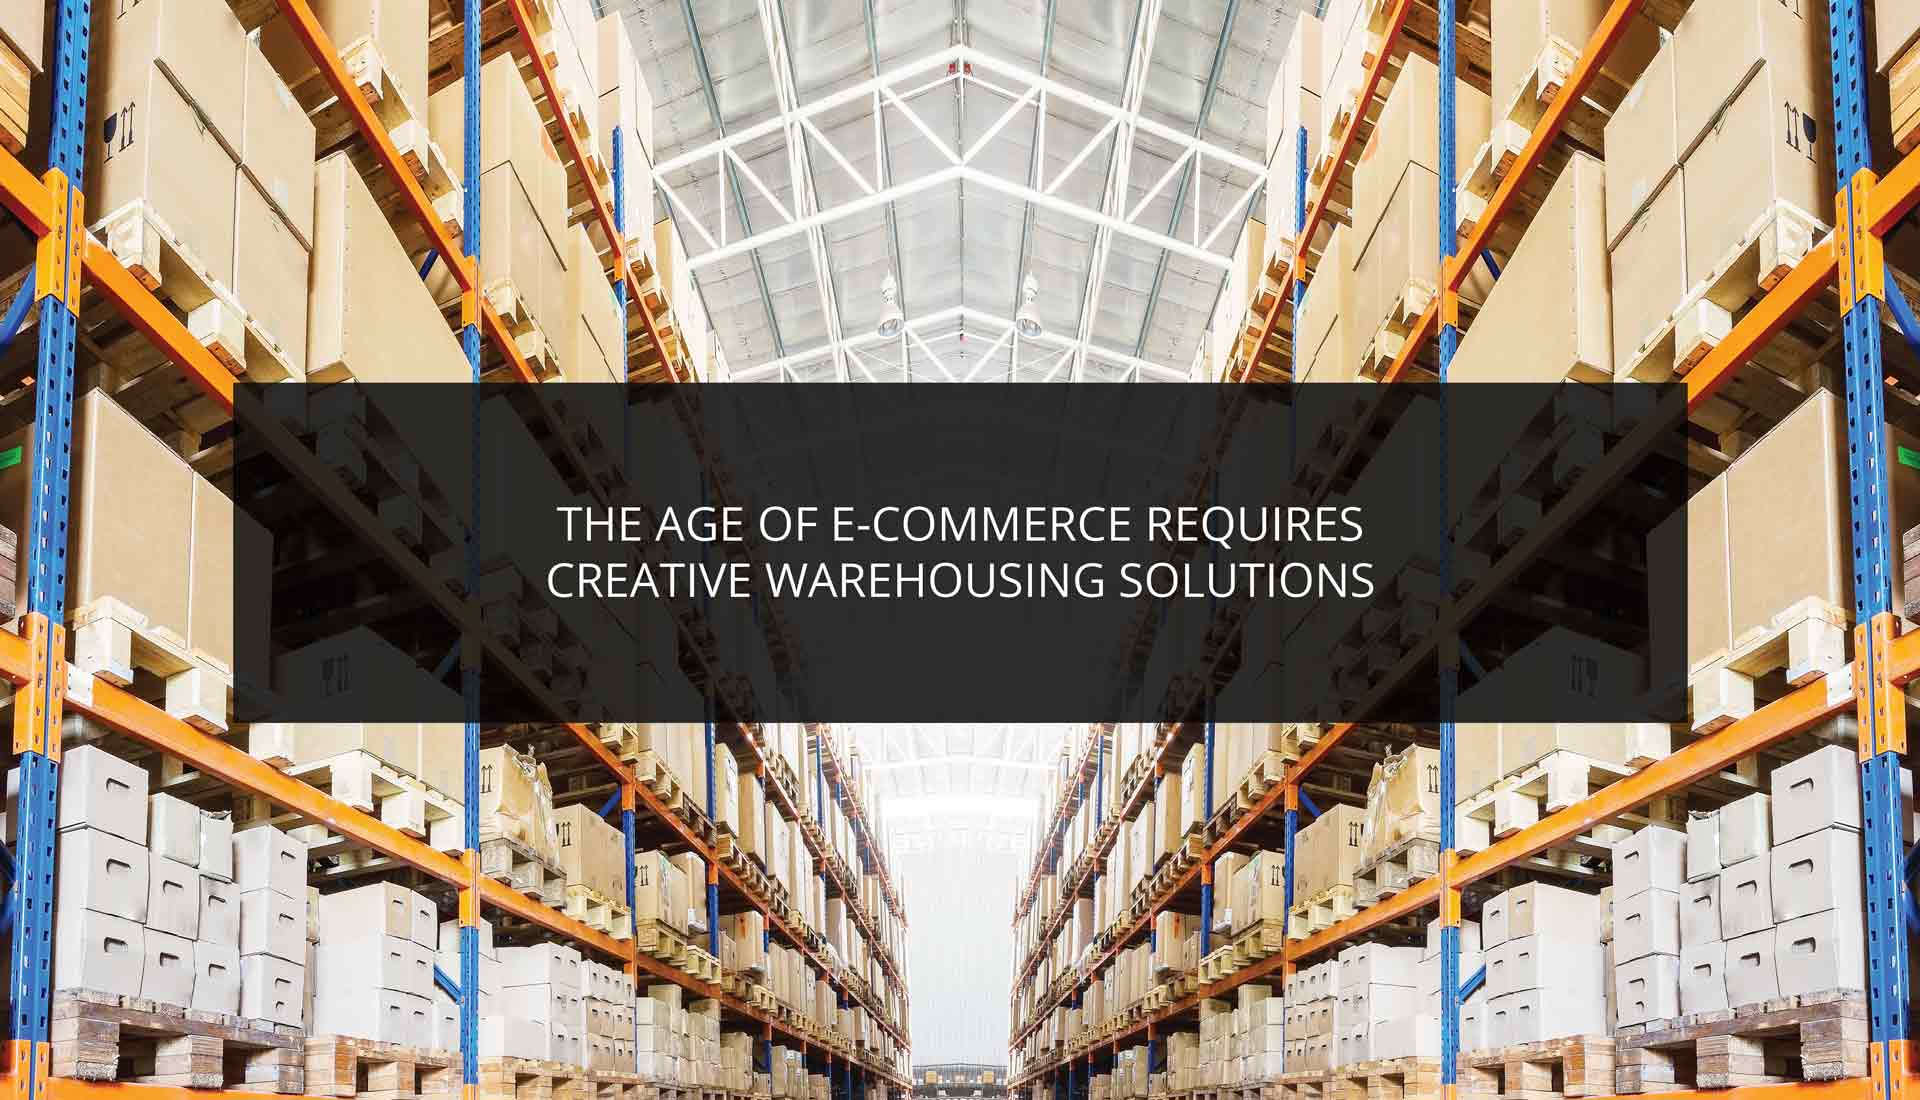 The Age of E-Commerce Requires Creative Warehousing Solutions